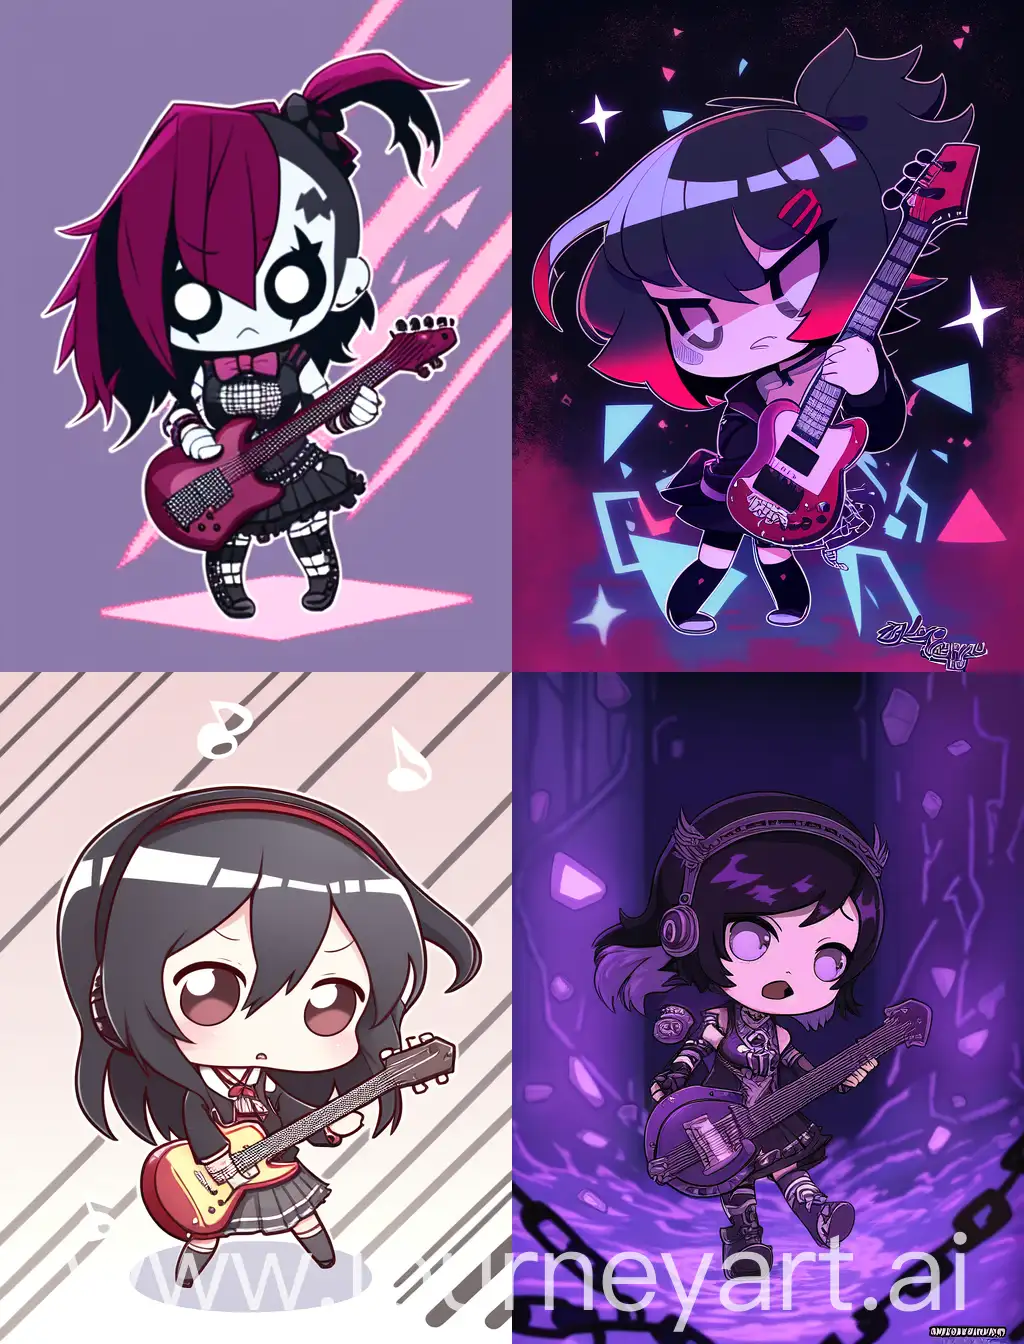 Chibi-Emo-Girl-Playing-Guitar-in-Cartoon-Anime-Style-with-Strong-Lines-and-Spooky-Background